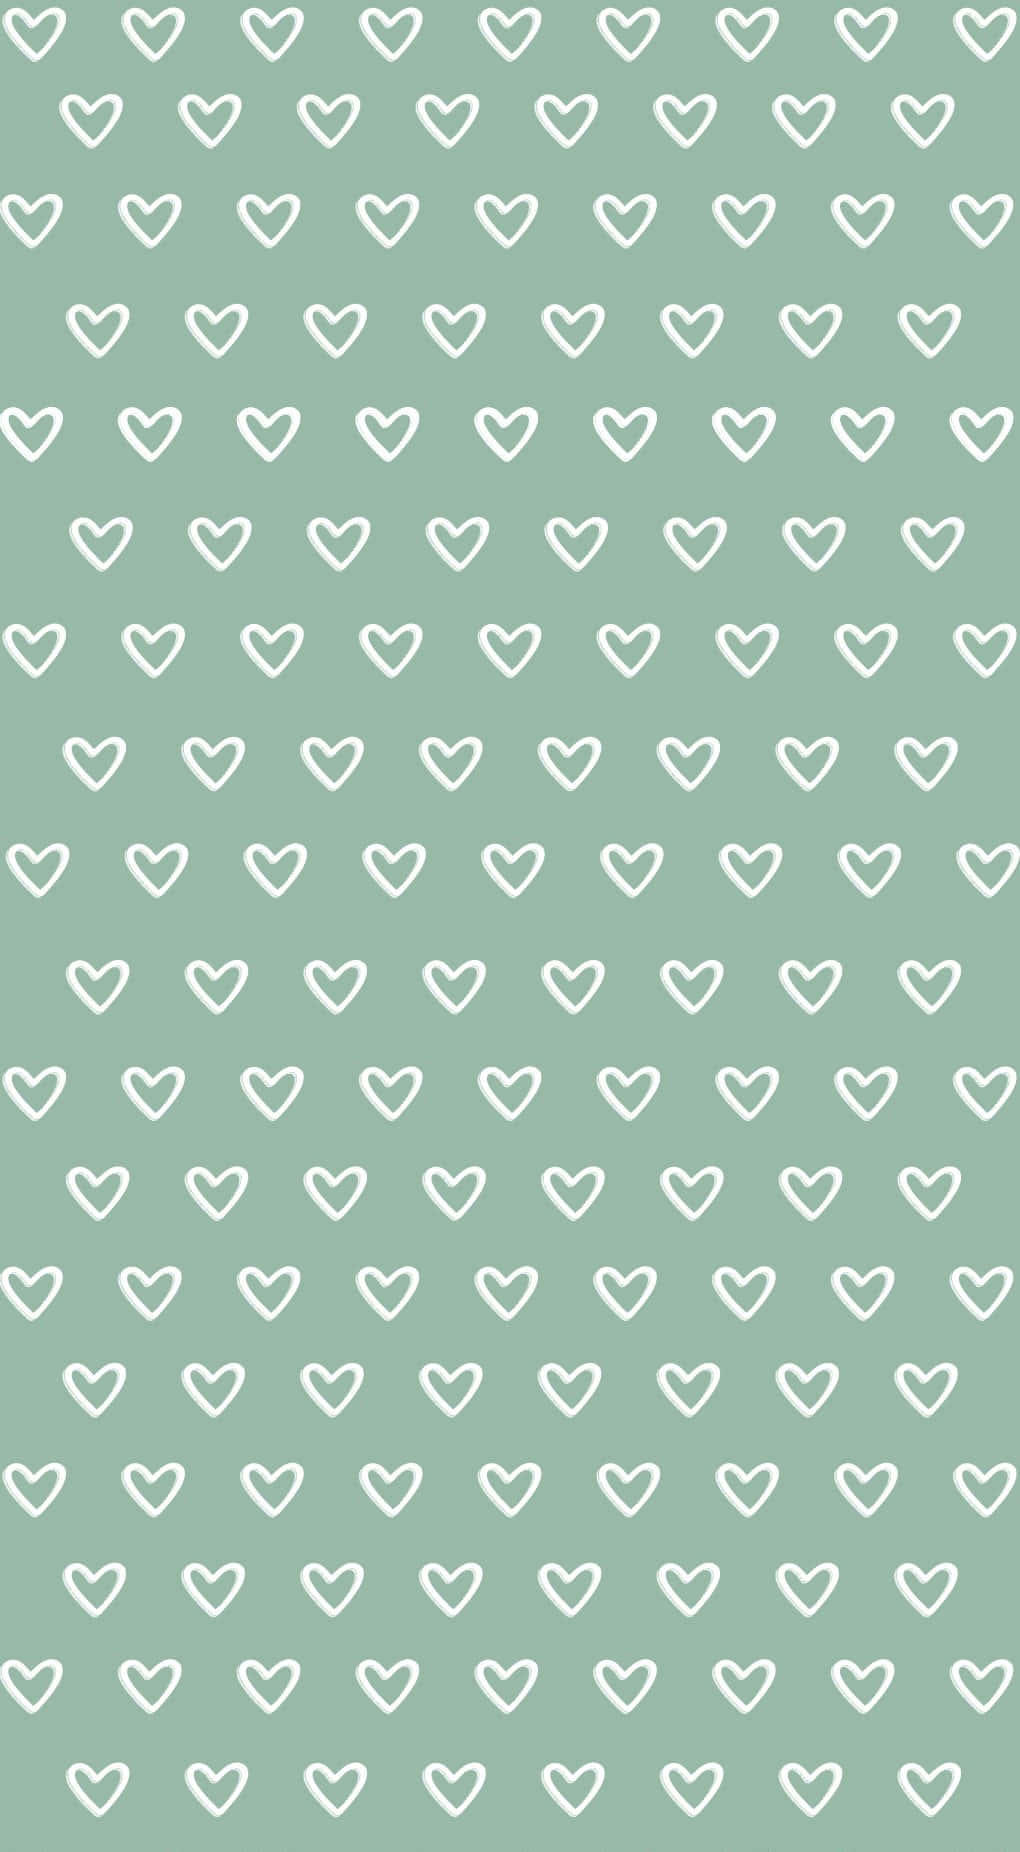 Staggered White Hearts Against Cute Sage Green Background